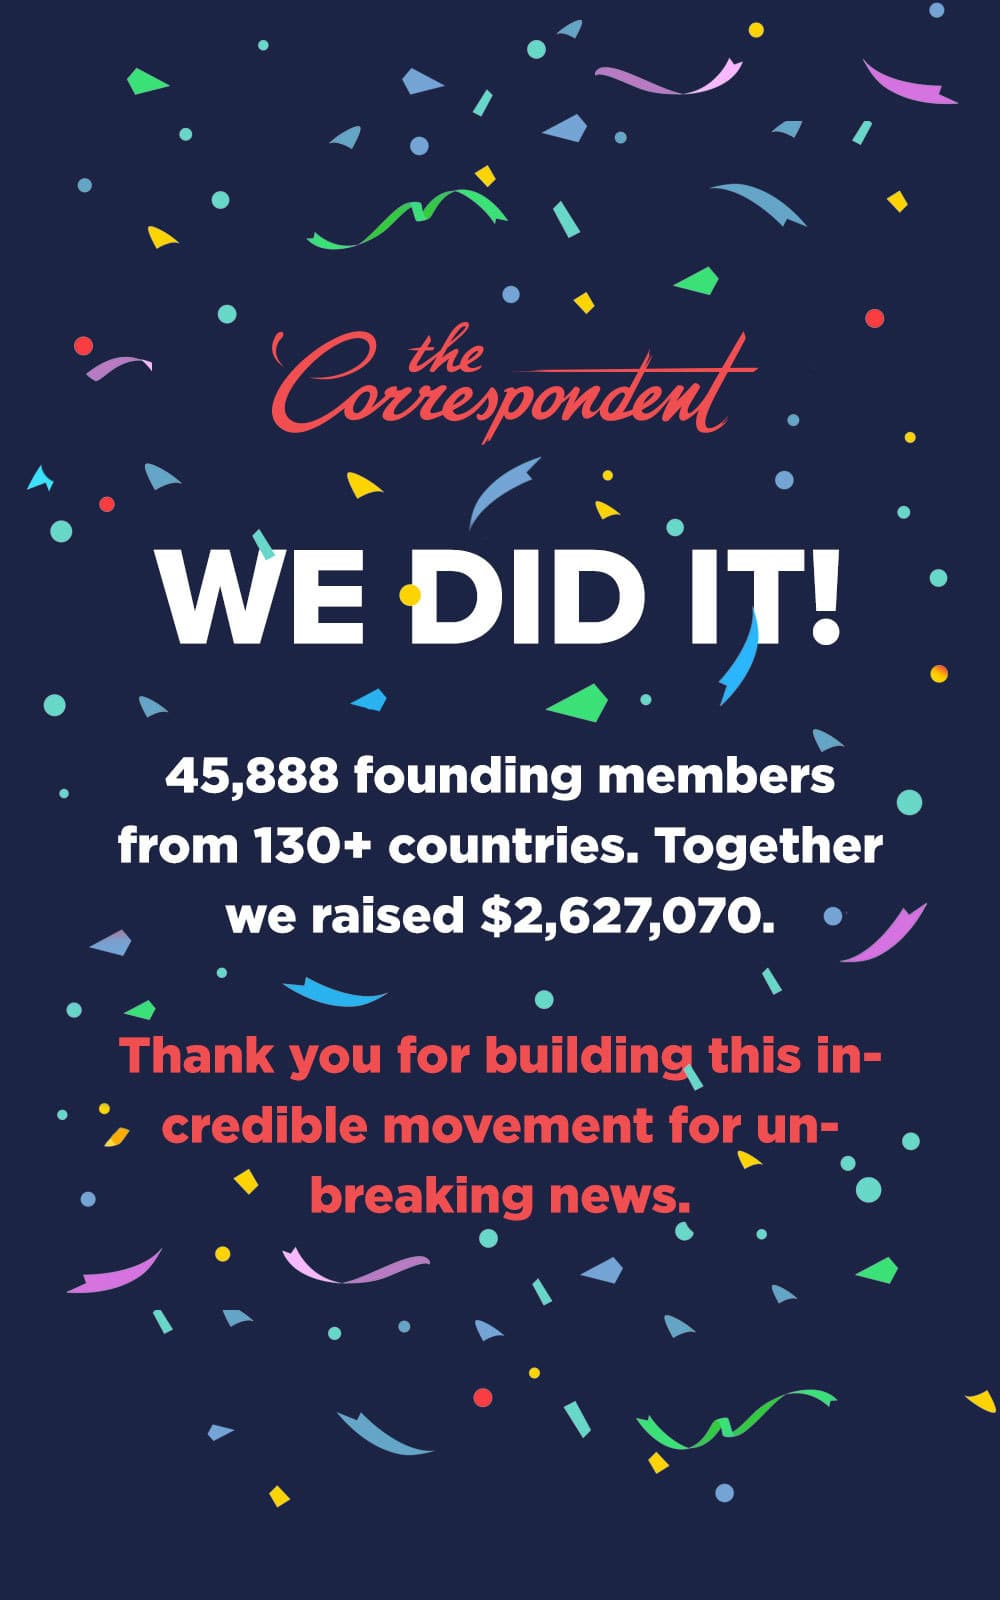 A new world record for the number of backers in a journalism crowdfunding campaign!